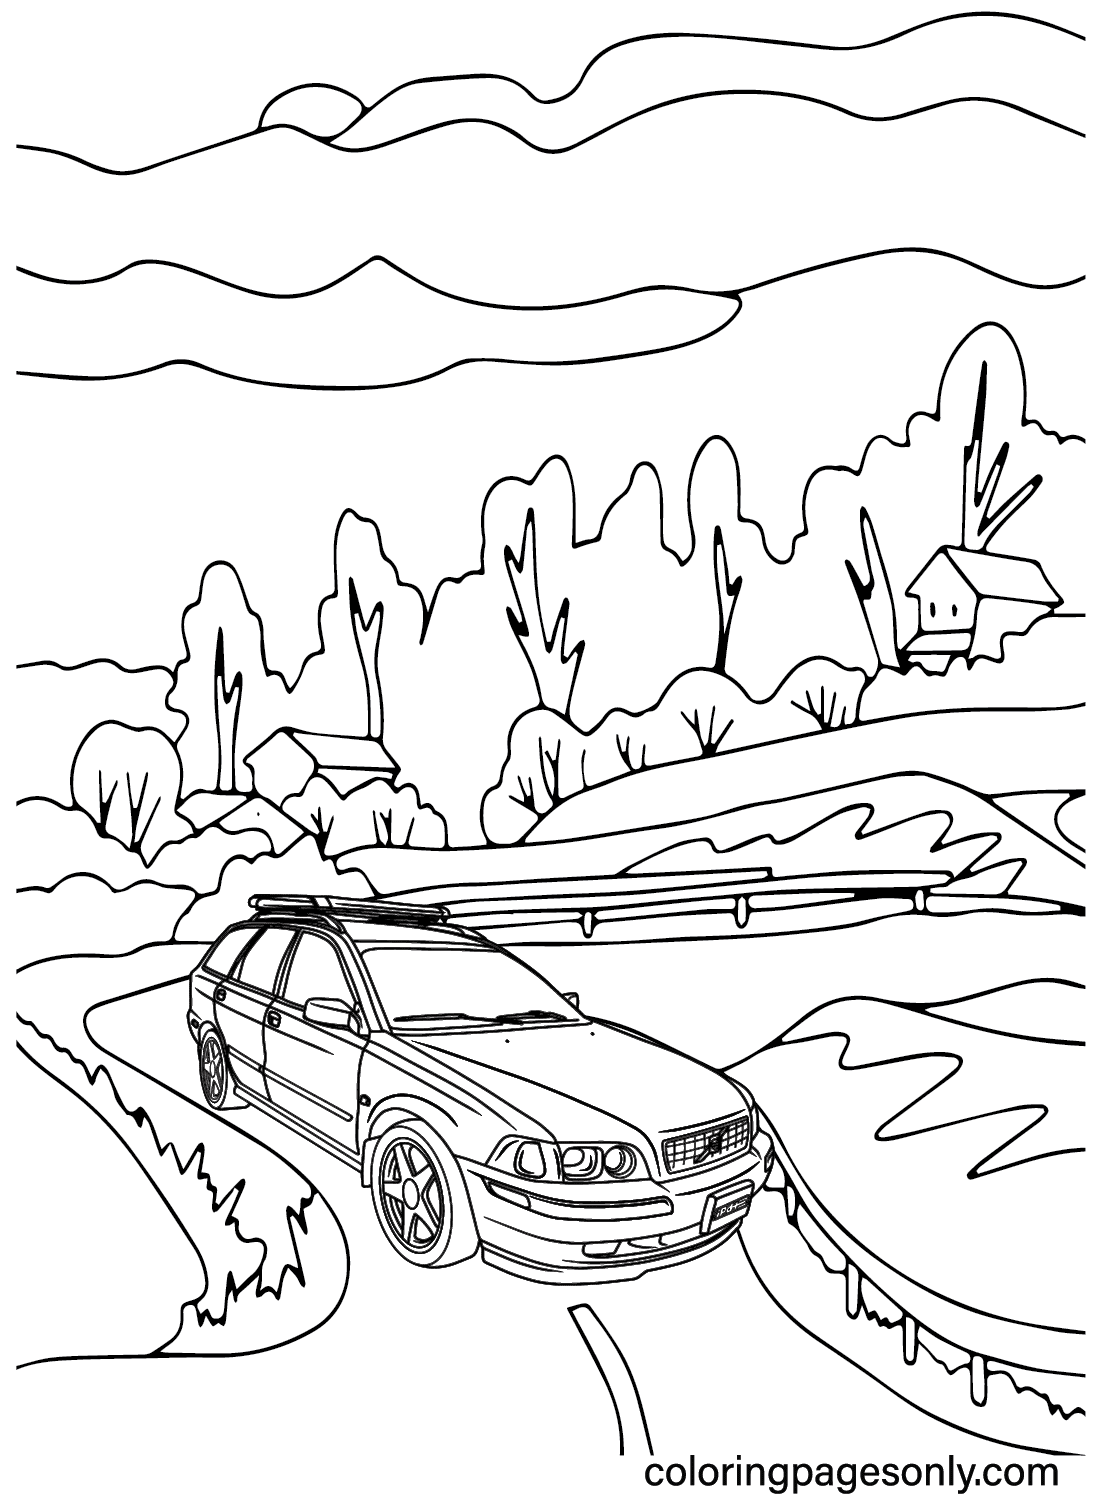 Volvo V40 Coloring Page - Free Printable Coloring Pages